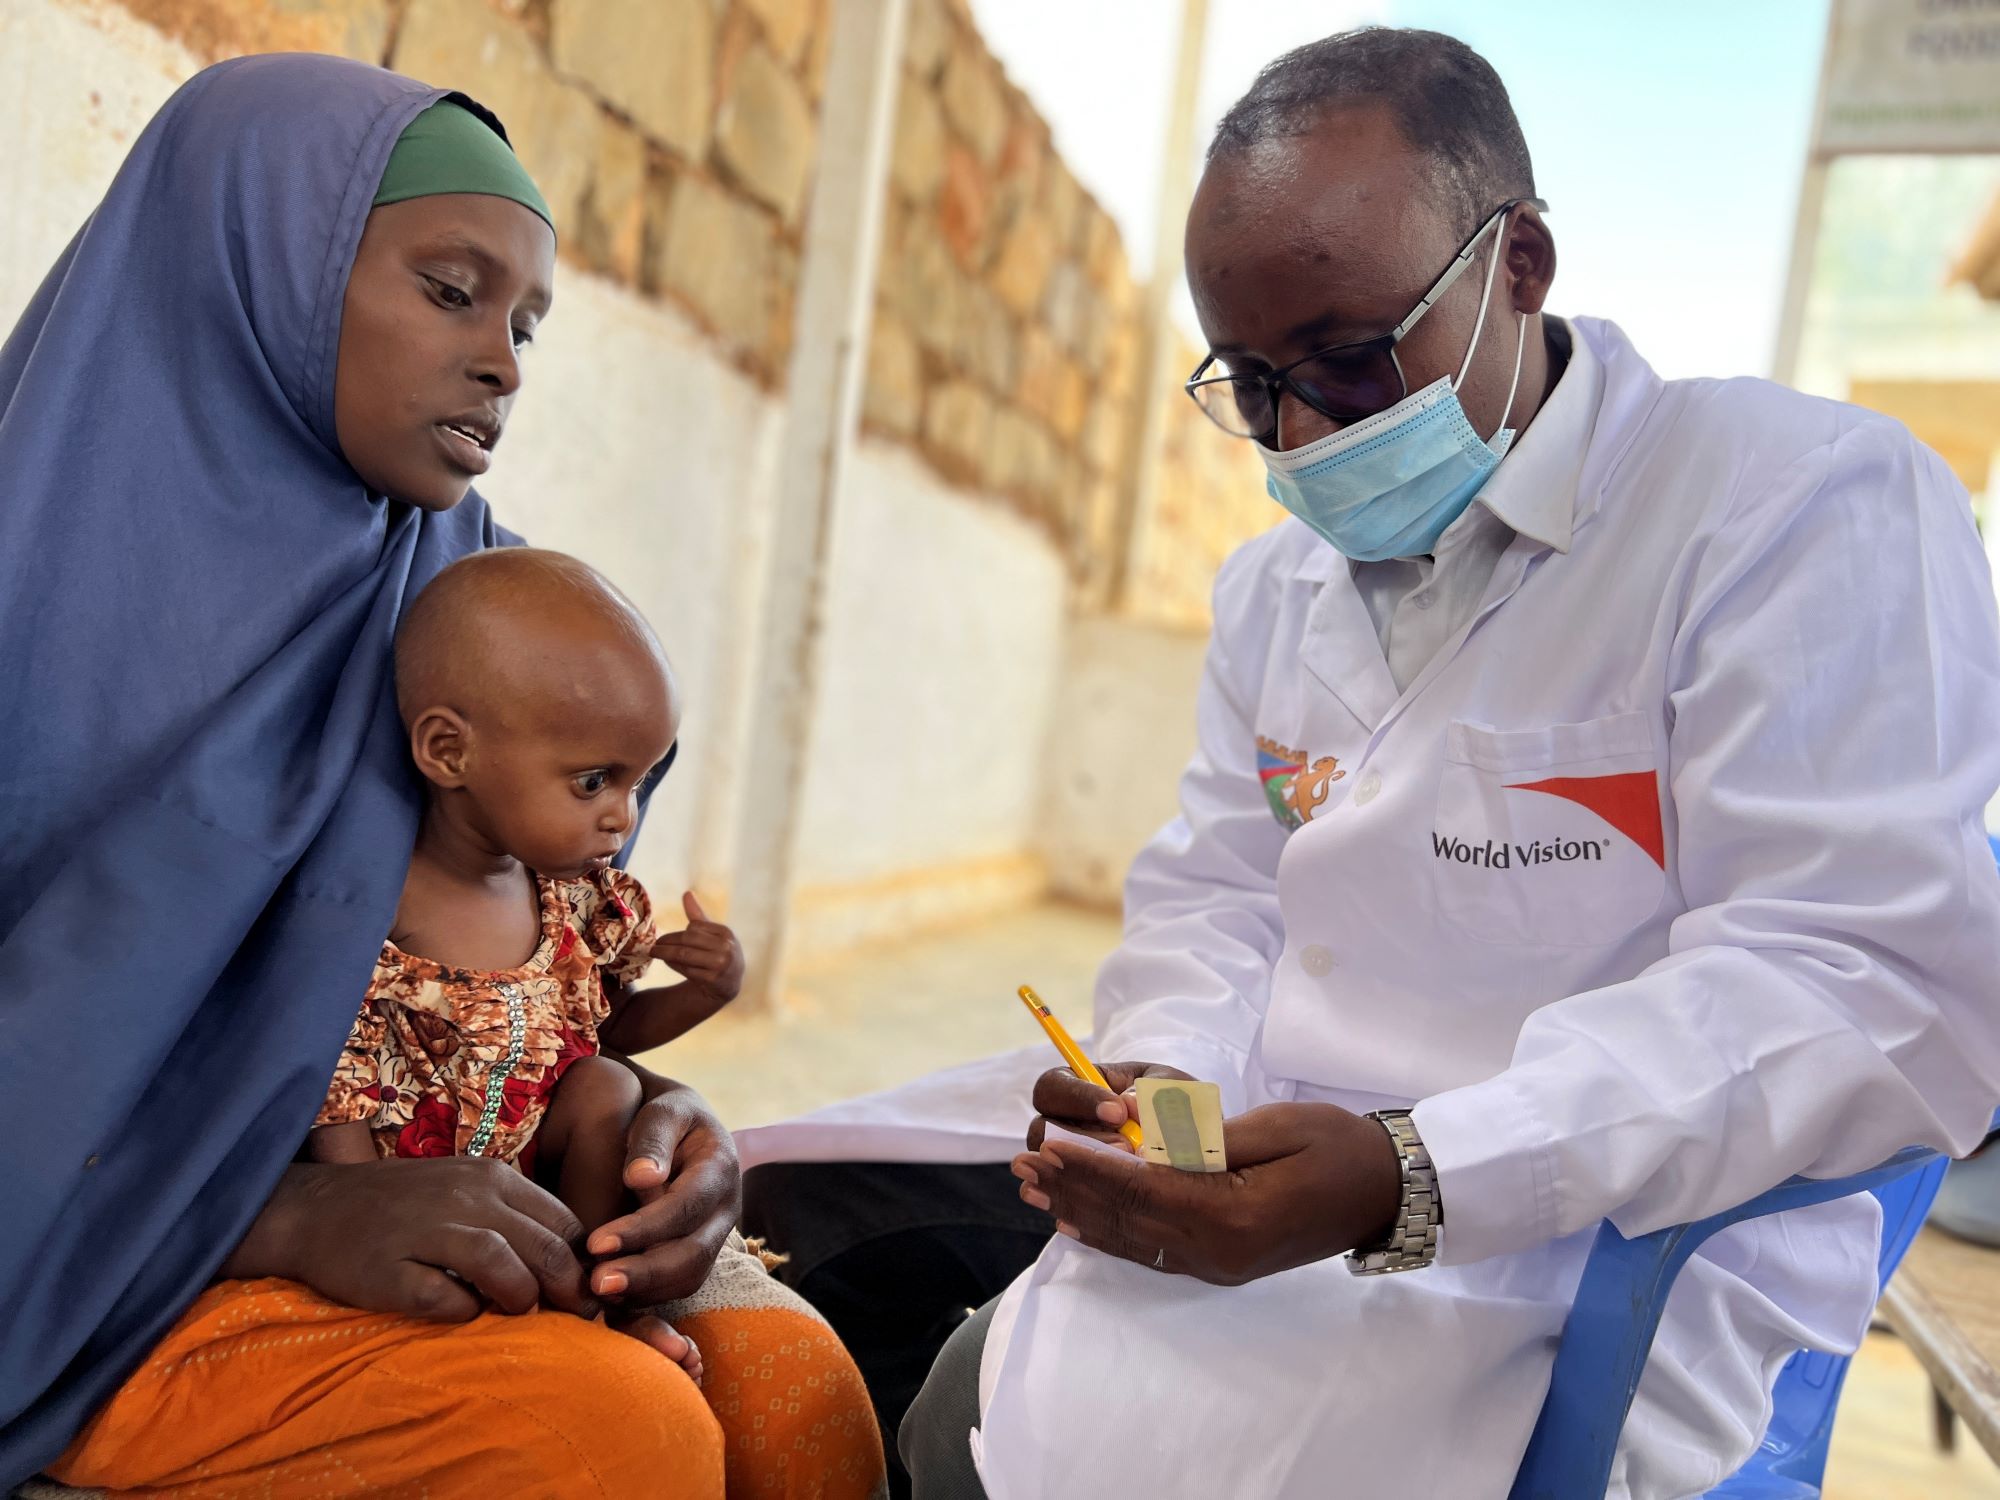 Child from Somalia is treated by World Vision staff during hunger crisis